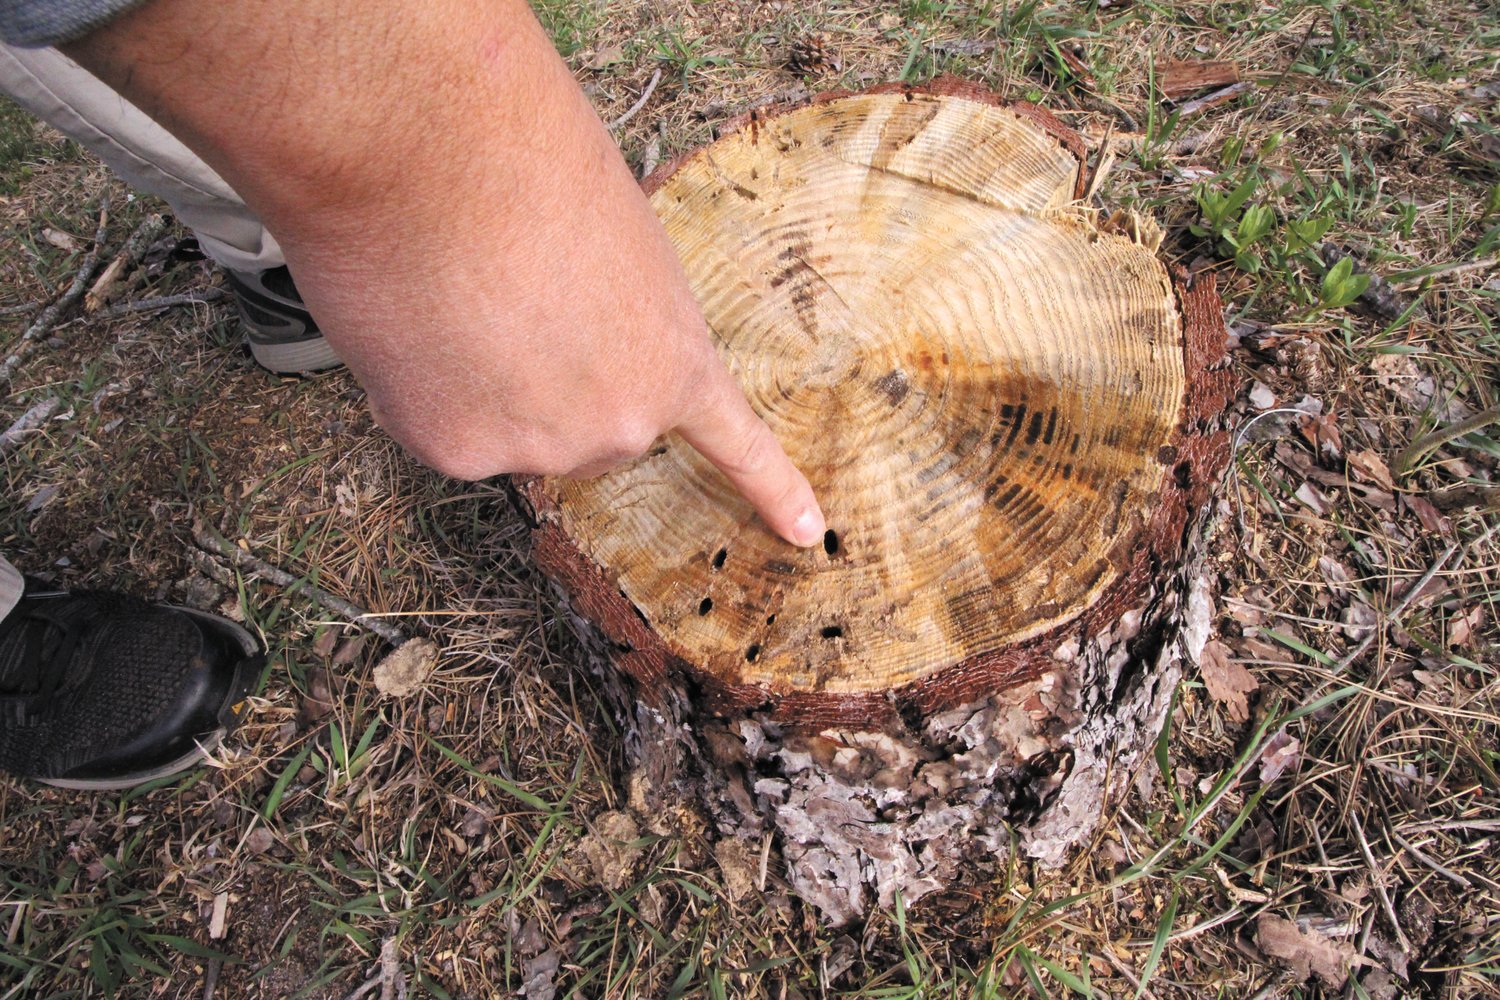 RING OF DEATH: A ring cutting the bark clear of the tree is visible on this dead back pine.